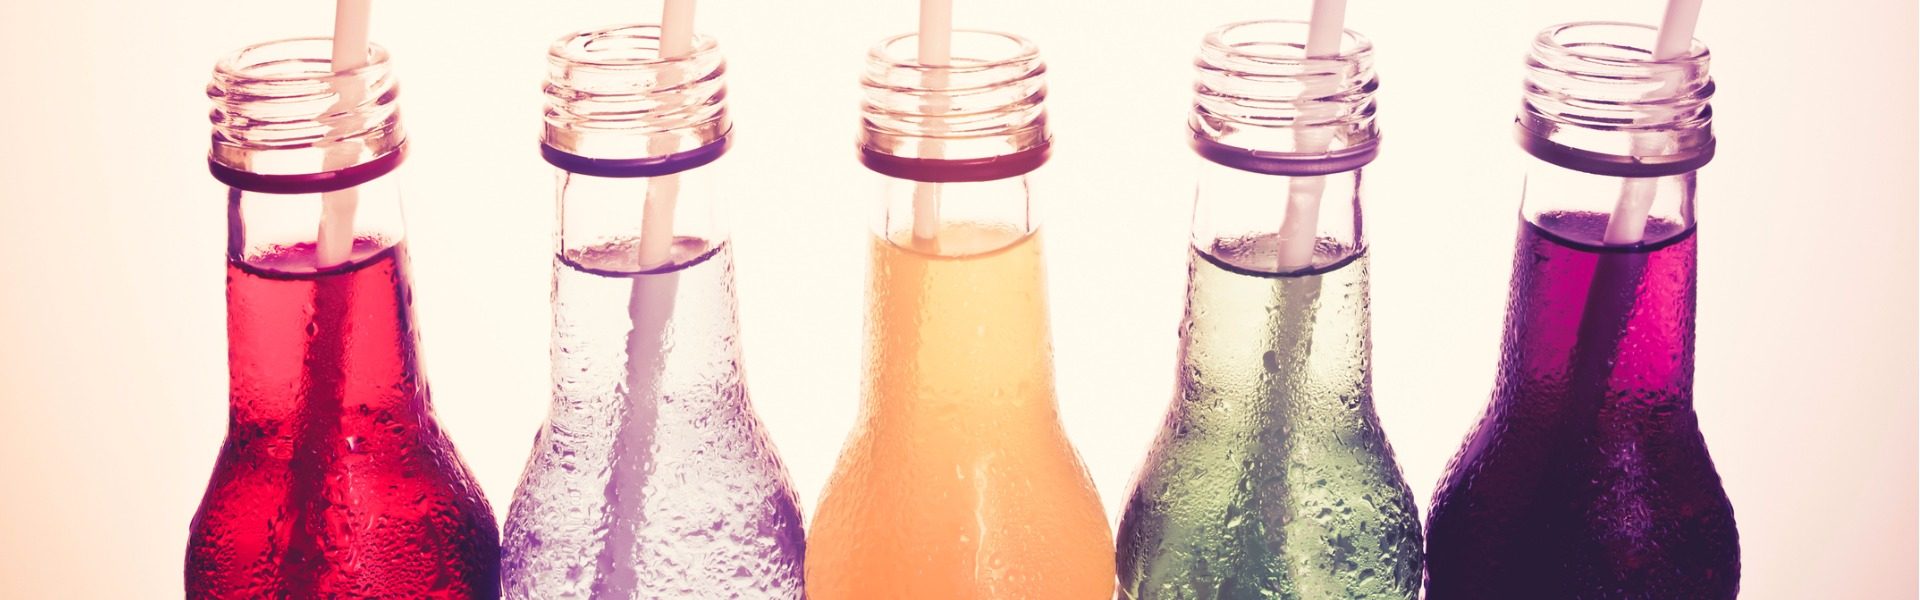 carbonated drinks and your bones _ mercy health